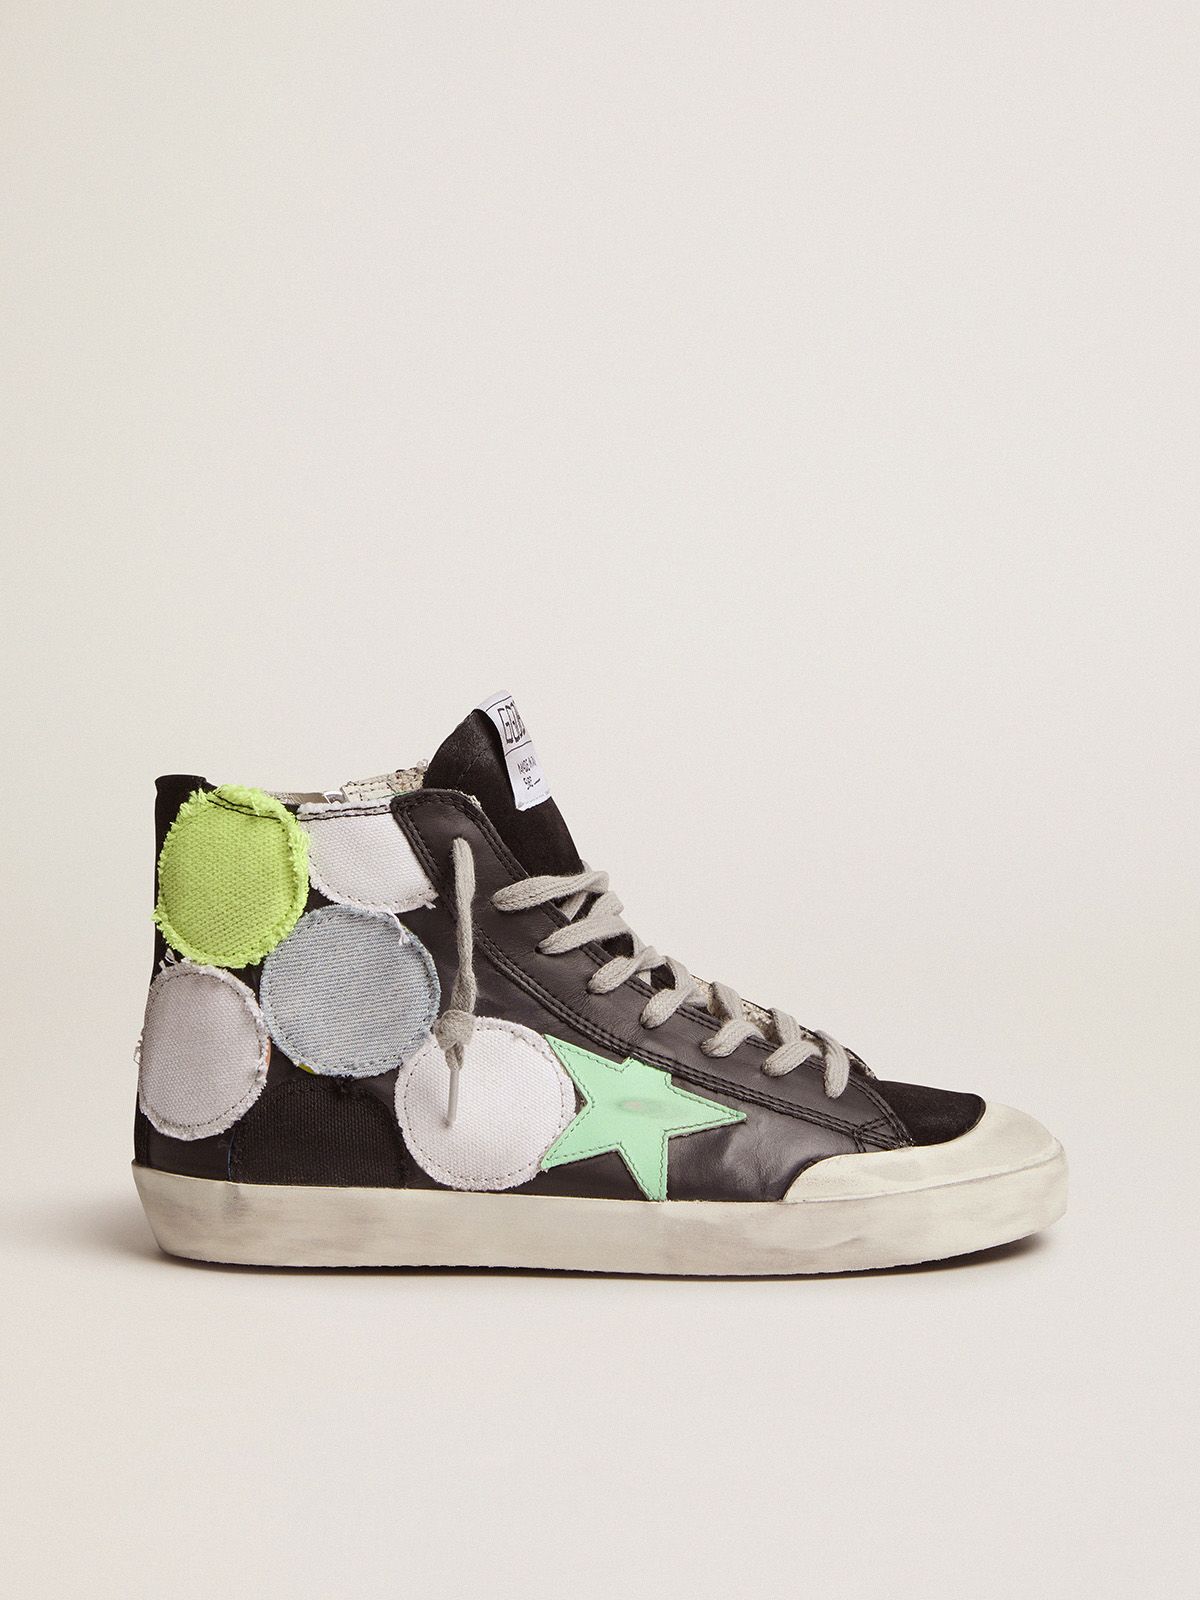 golden goose Dream coloured sneakers polka-dot Penstar with Collection patches Francy Maker